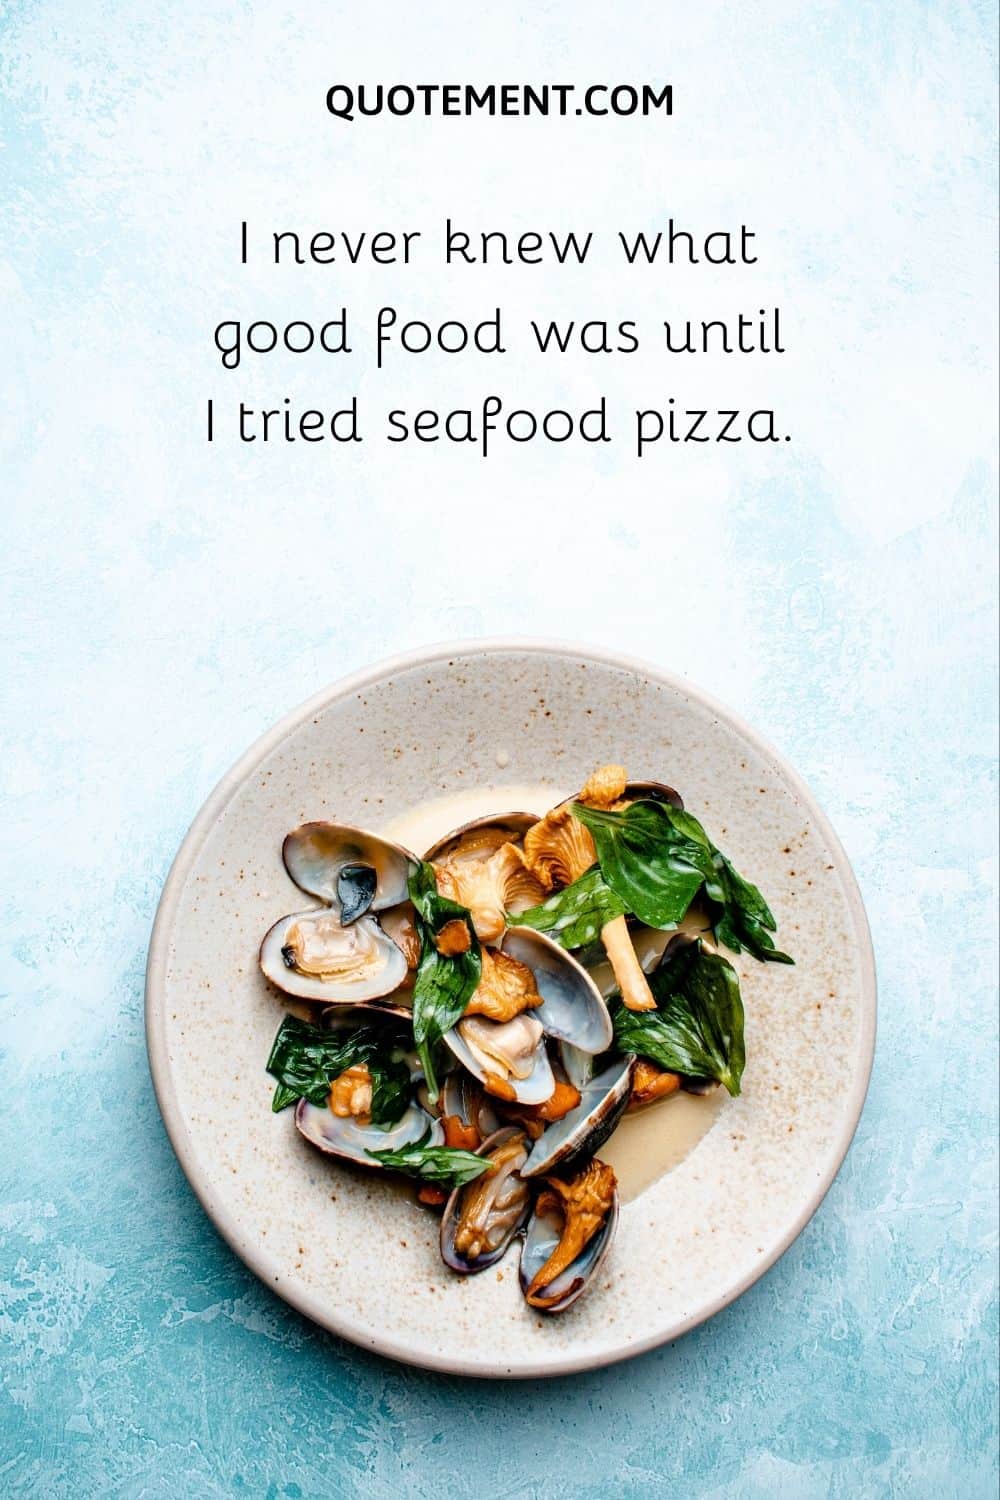 I never knew what good food was until I tried seafood pizza.